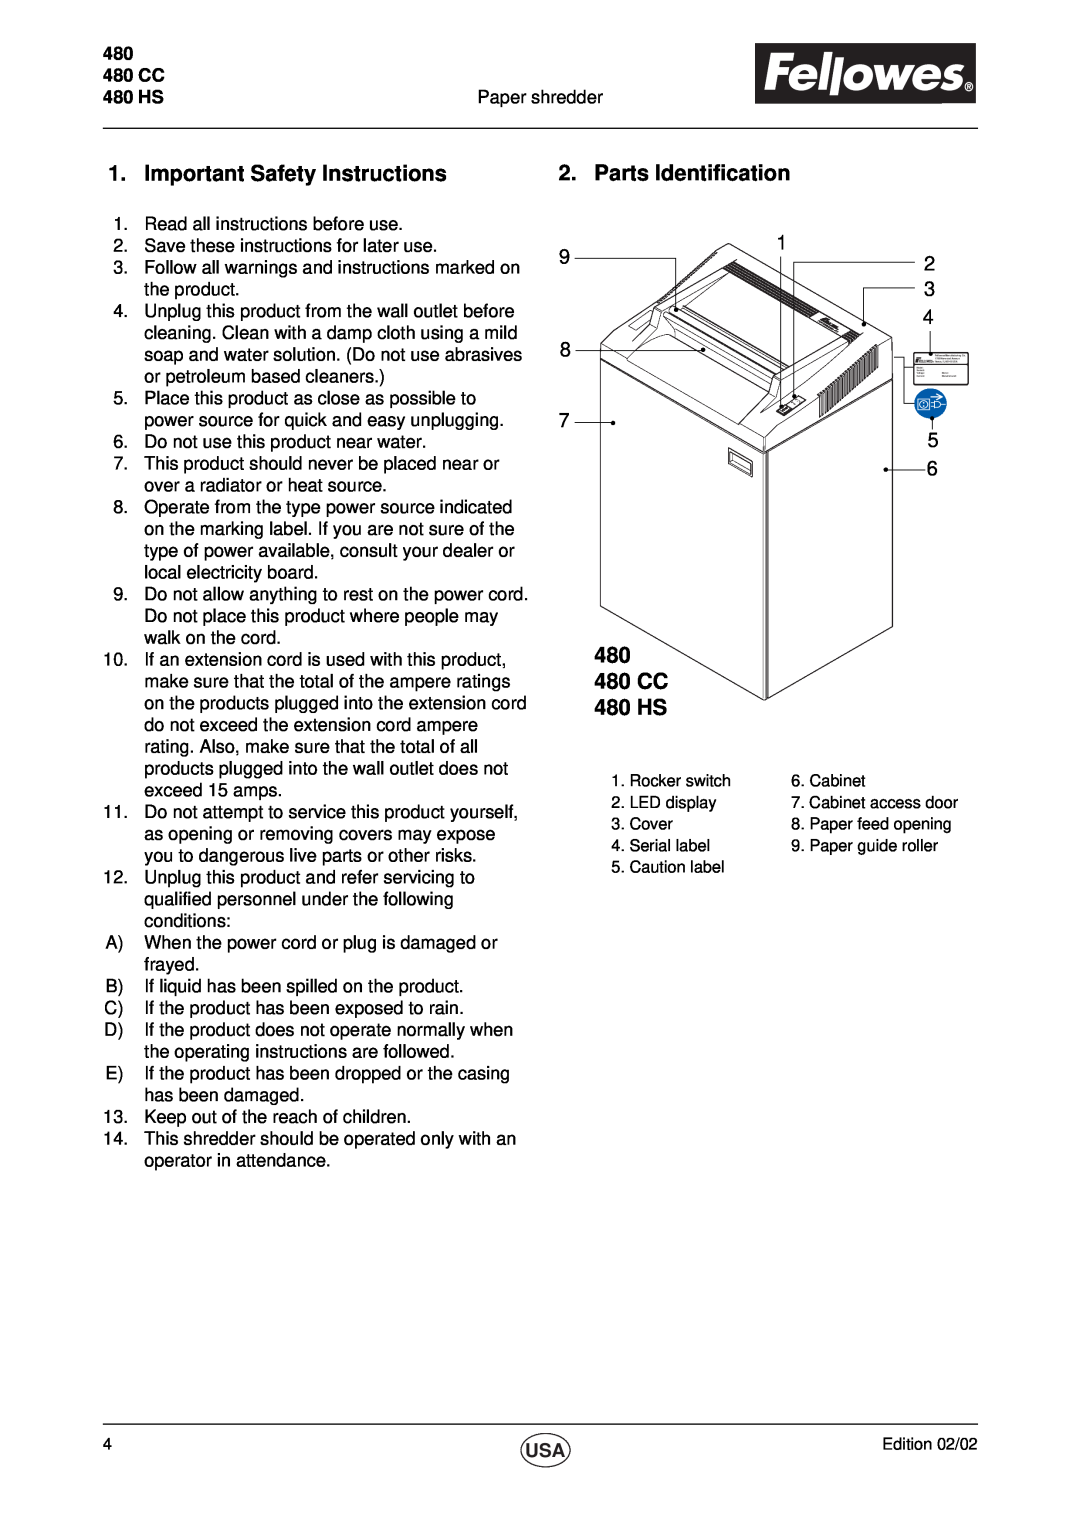 Fellowes 480 CC Important Safety Instructions, Parts Identification, 480 480CC 480HS, 480 HS, Paper shredder 